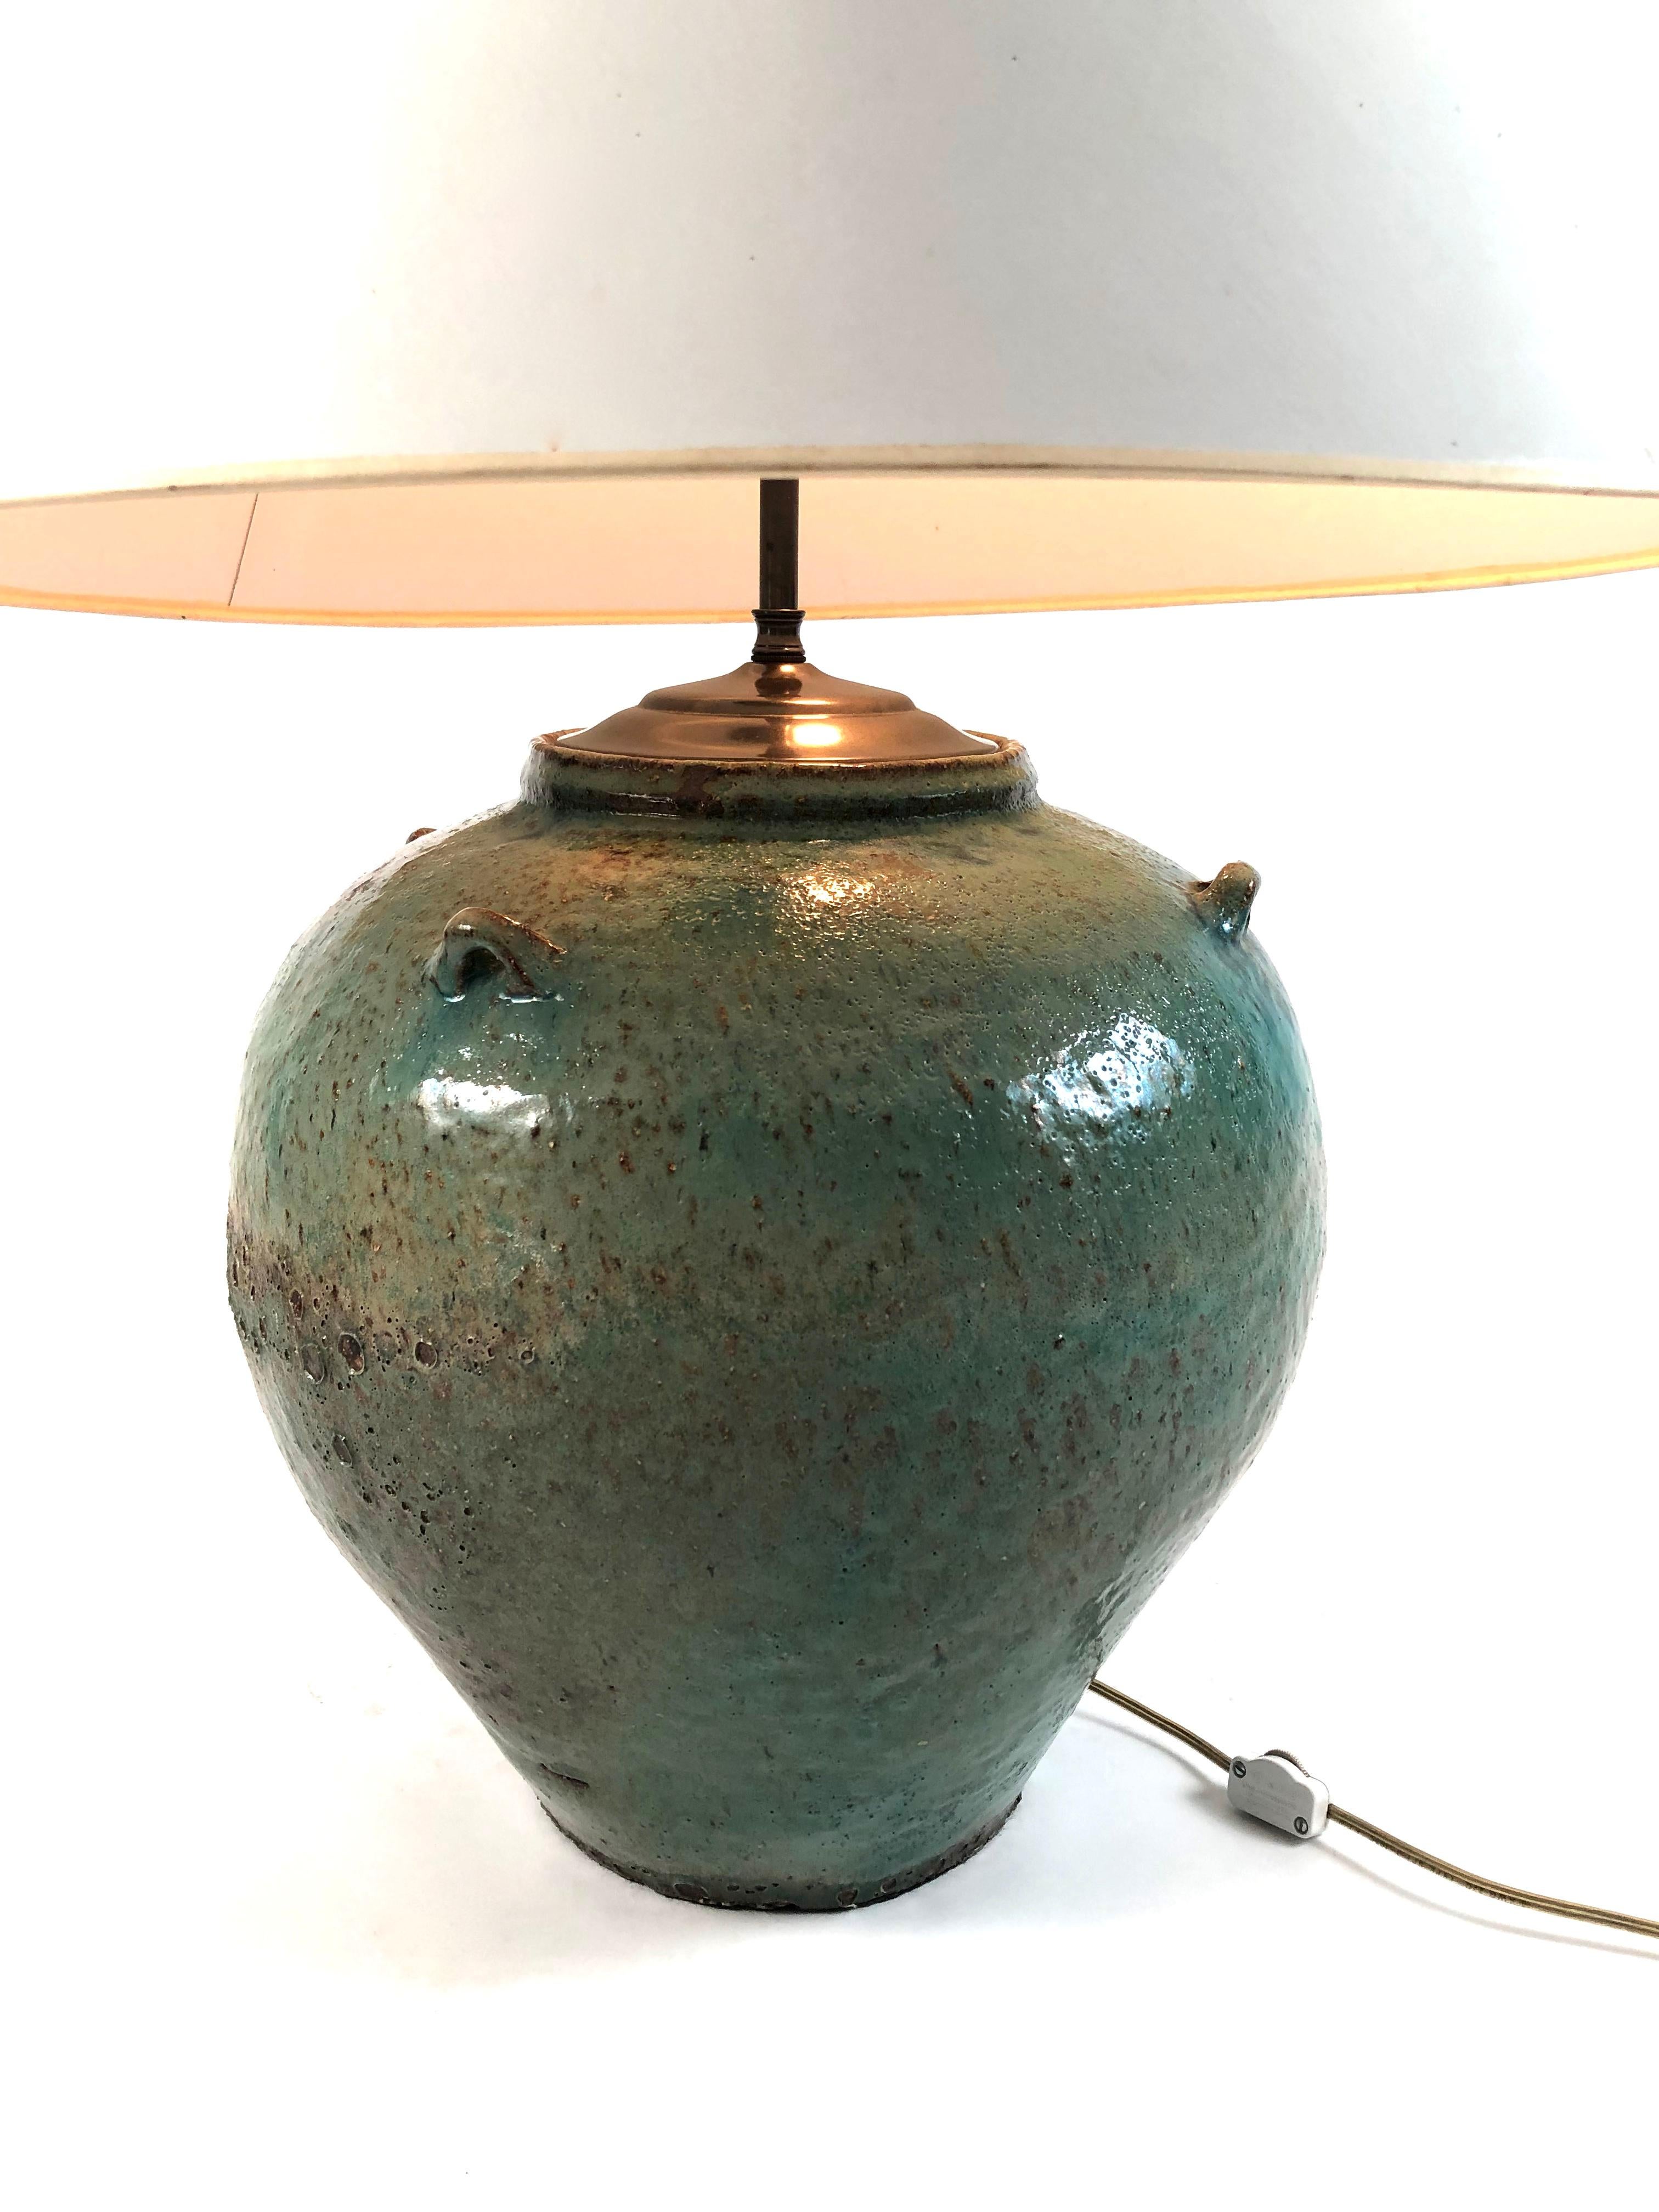 A beautiful and large handmade celadon green, blue and tan glazed art pottery lamp, possibly Japanese, with mottled surface, the high shoulders with four small decorative loop straps. New antiqued bronze metal fittings at the top and new